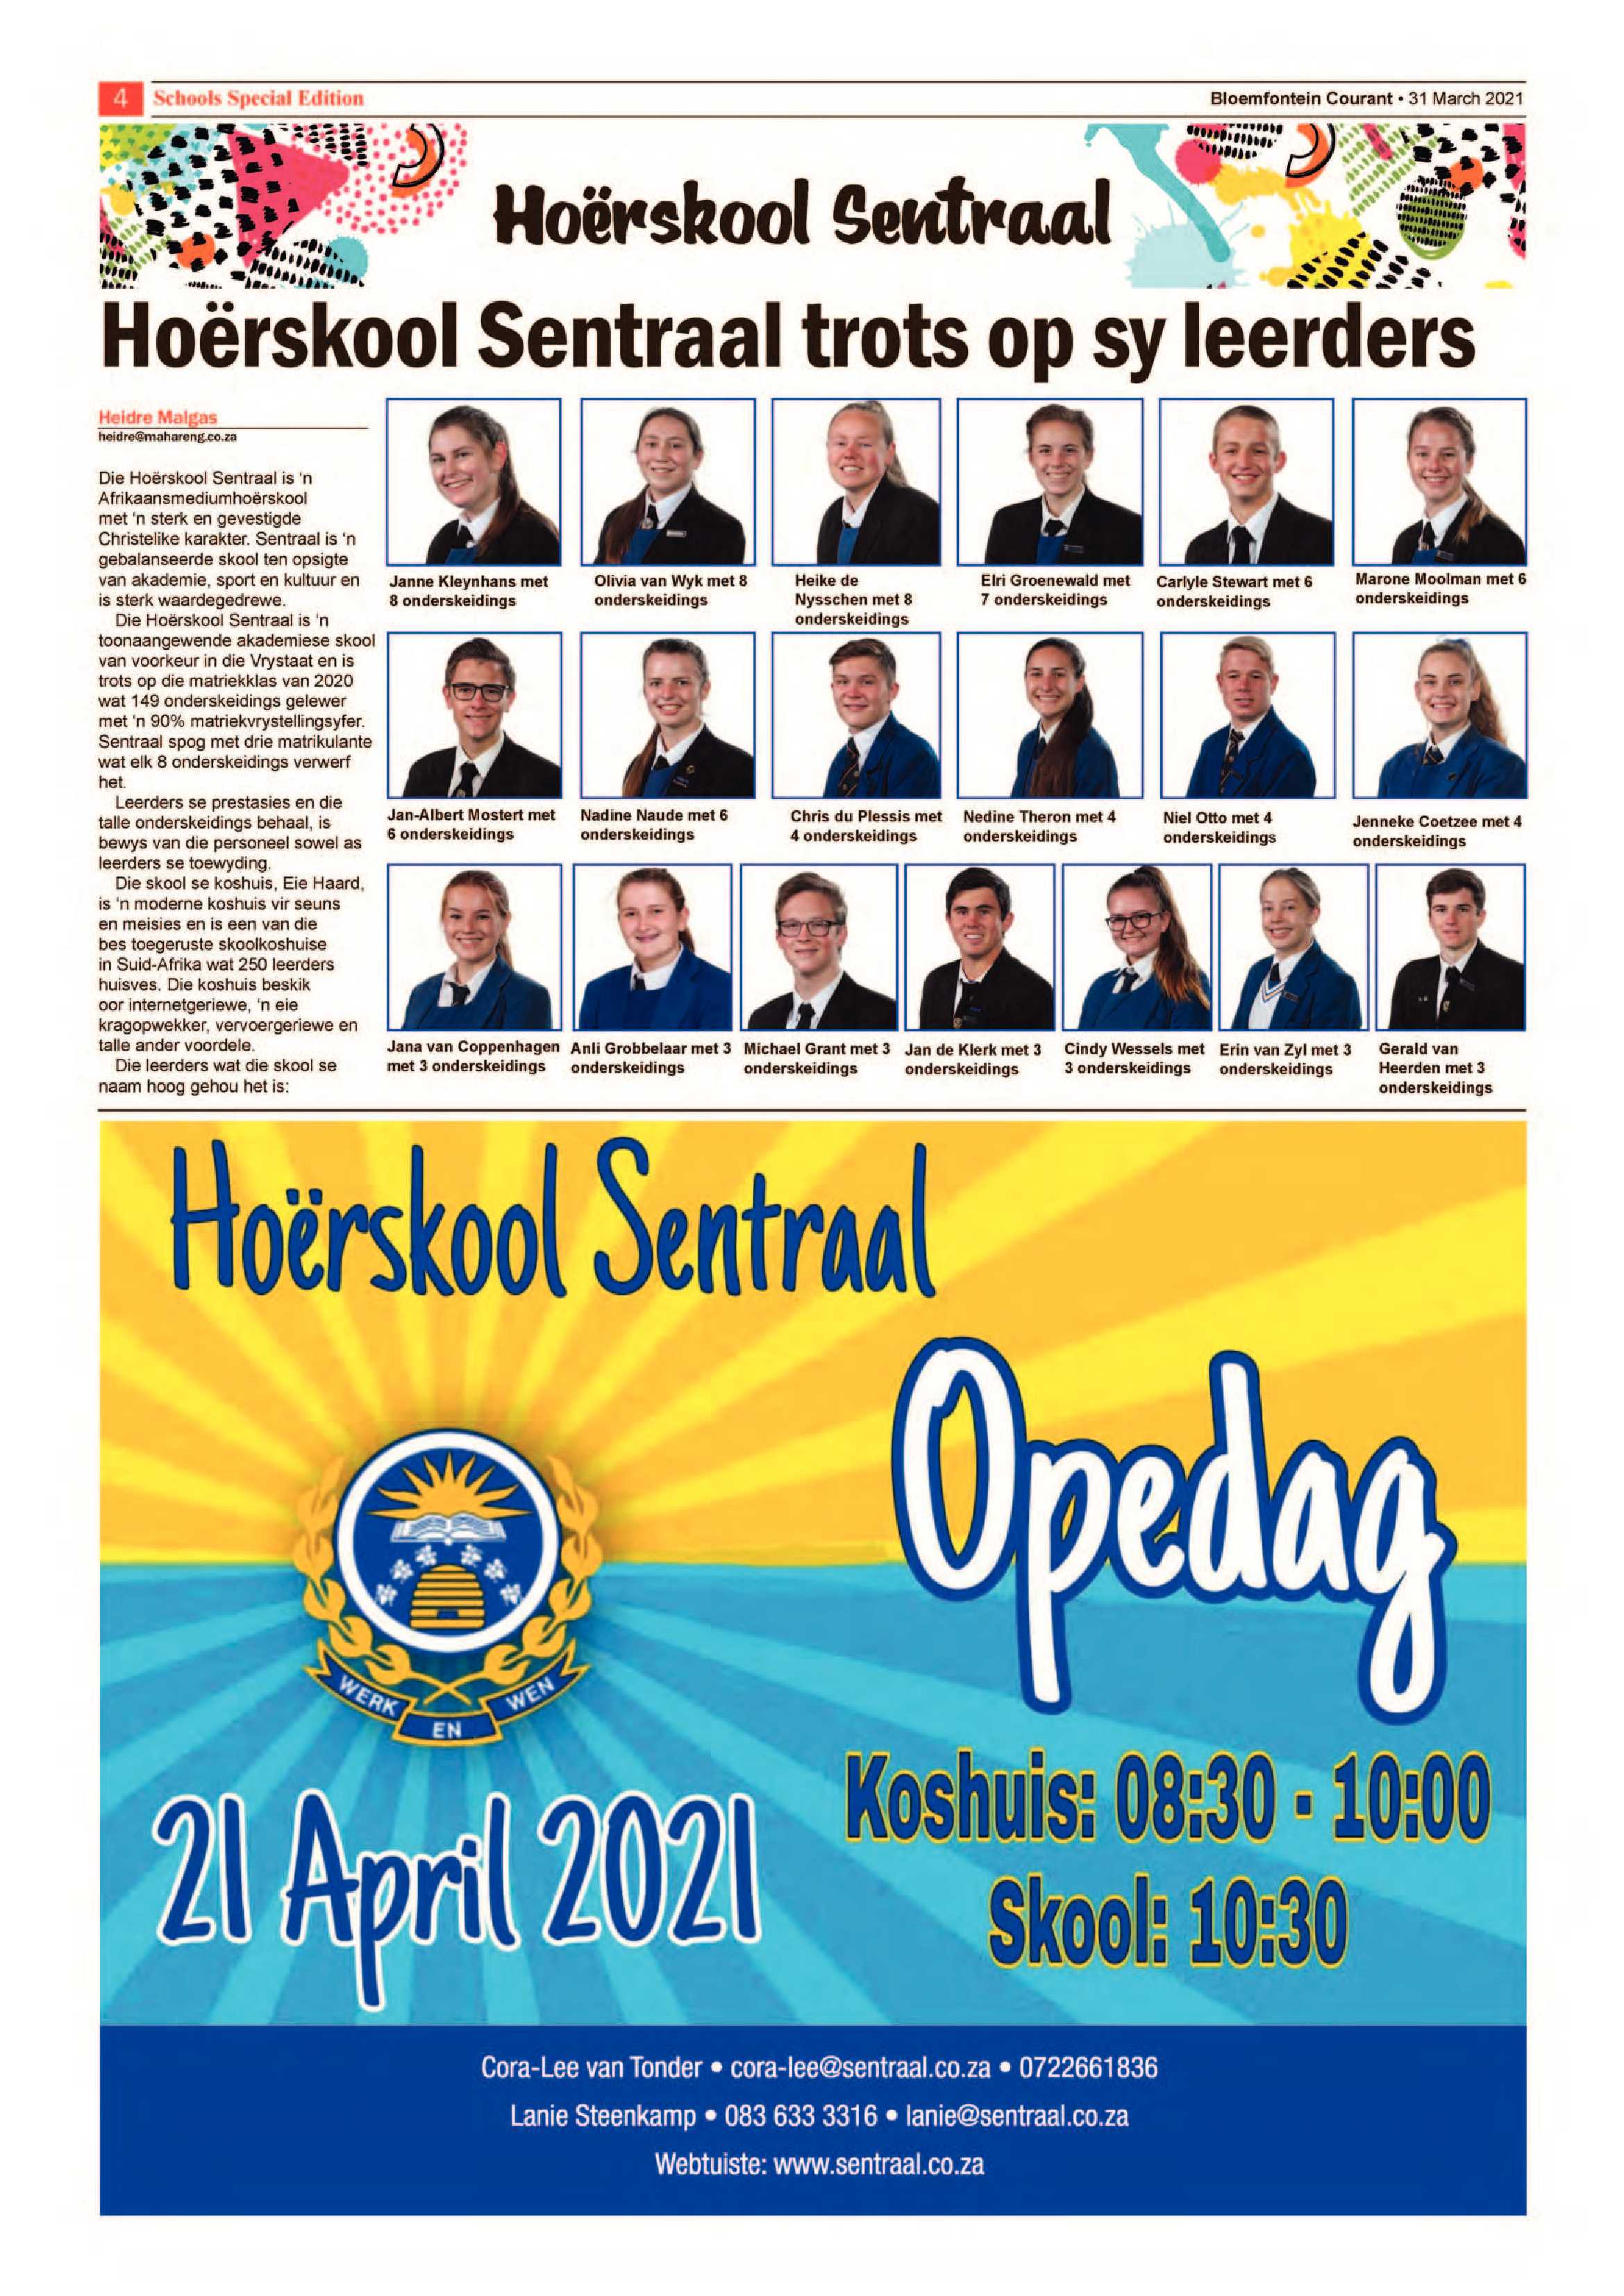 courant-school-edition-31-march-2021-2-epapers-page-4